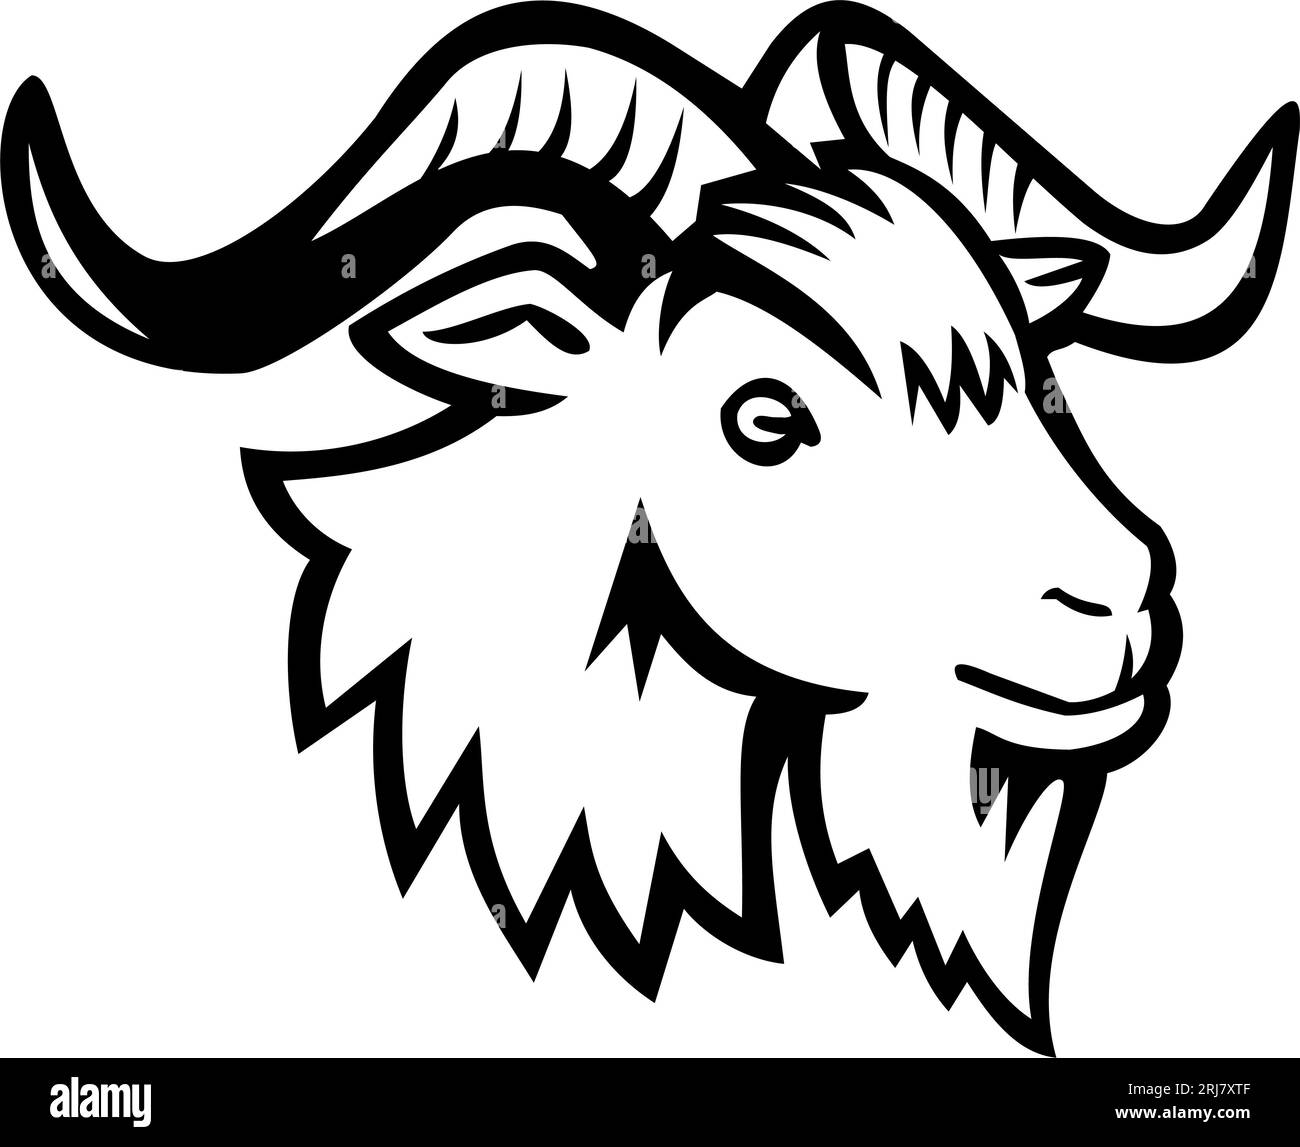 Mascot illustration of head of Juan Fernandez wild goat viewed from the side on isolated background in retro style. Stock Photo